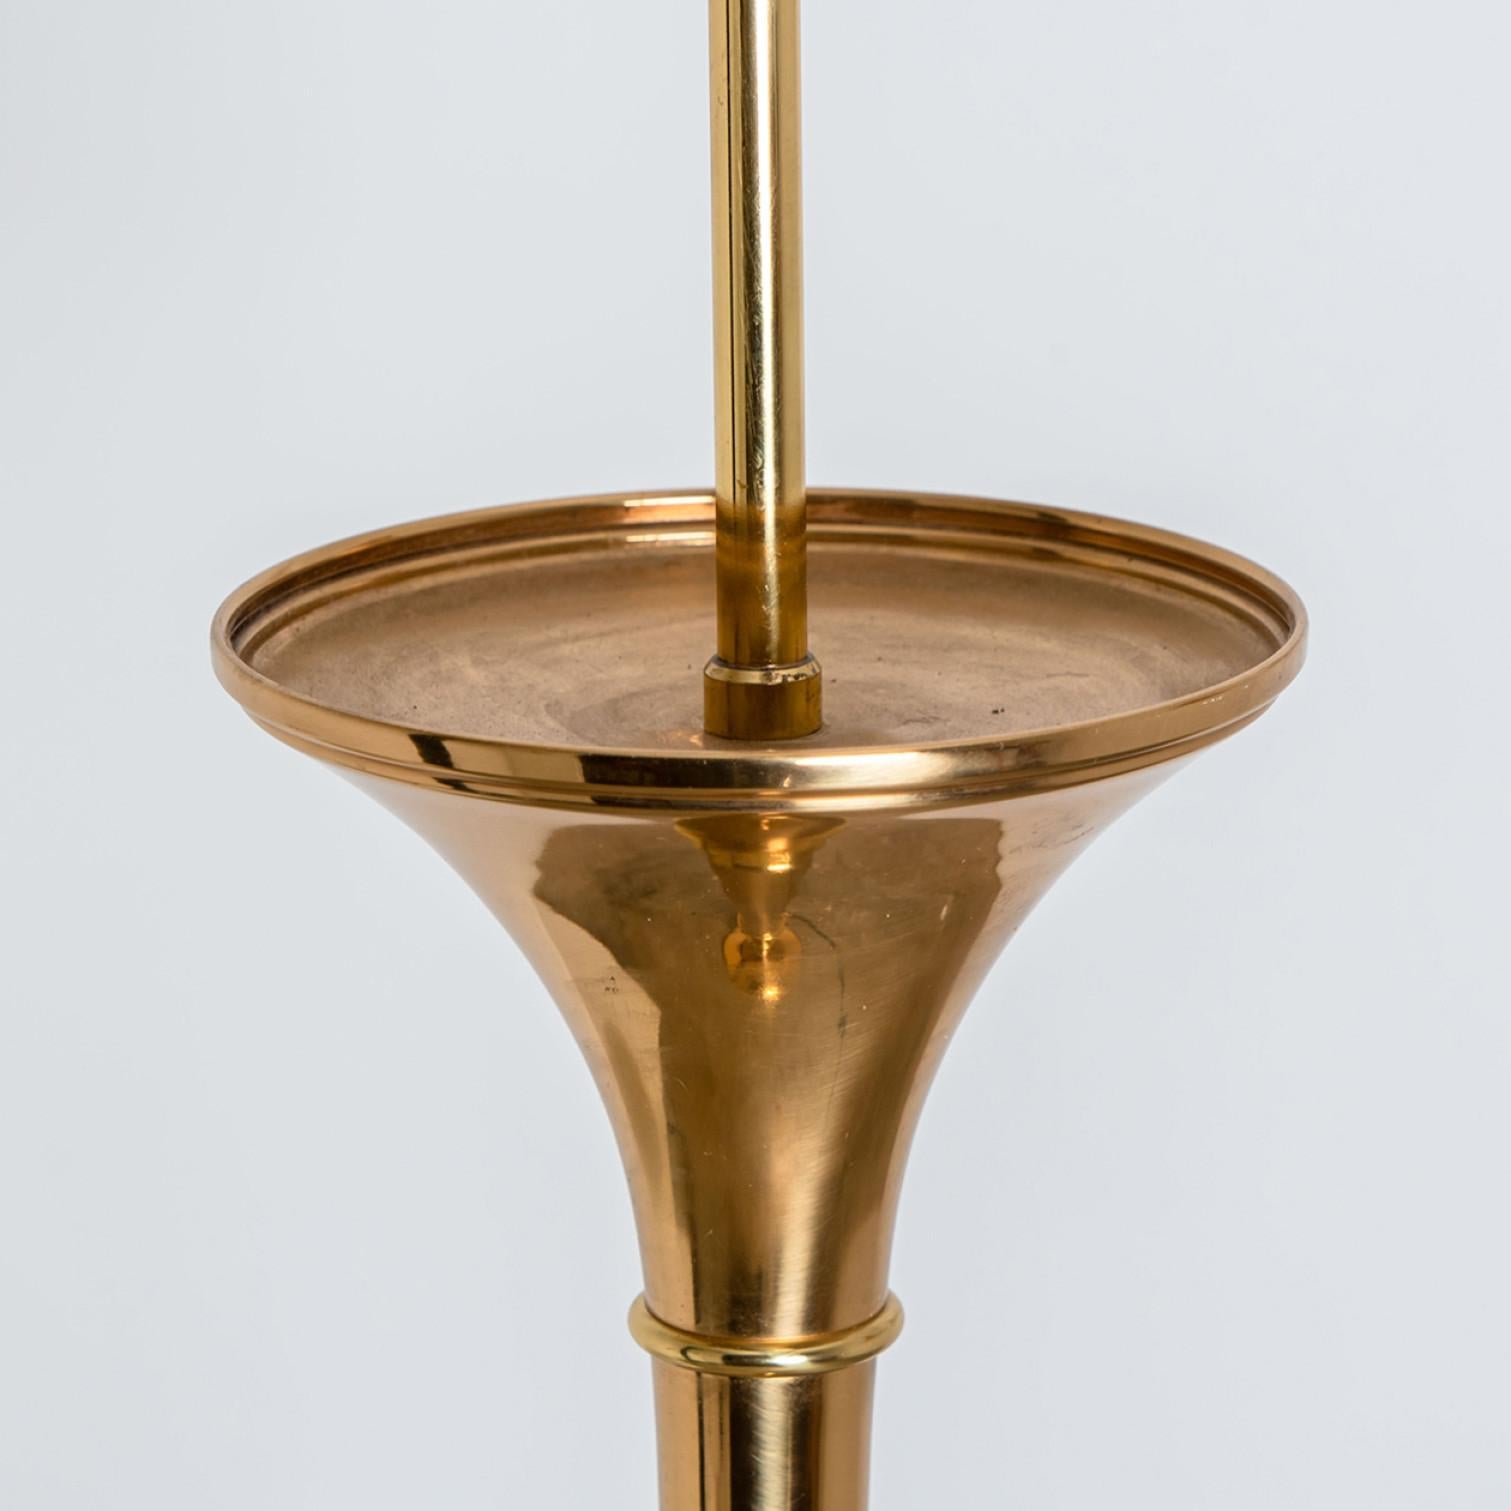 Floor Lamp Gold Designed by Ingo Maurer, Europe, Germany, 1968 In Good Condition For Sale In Rijssen, NL